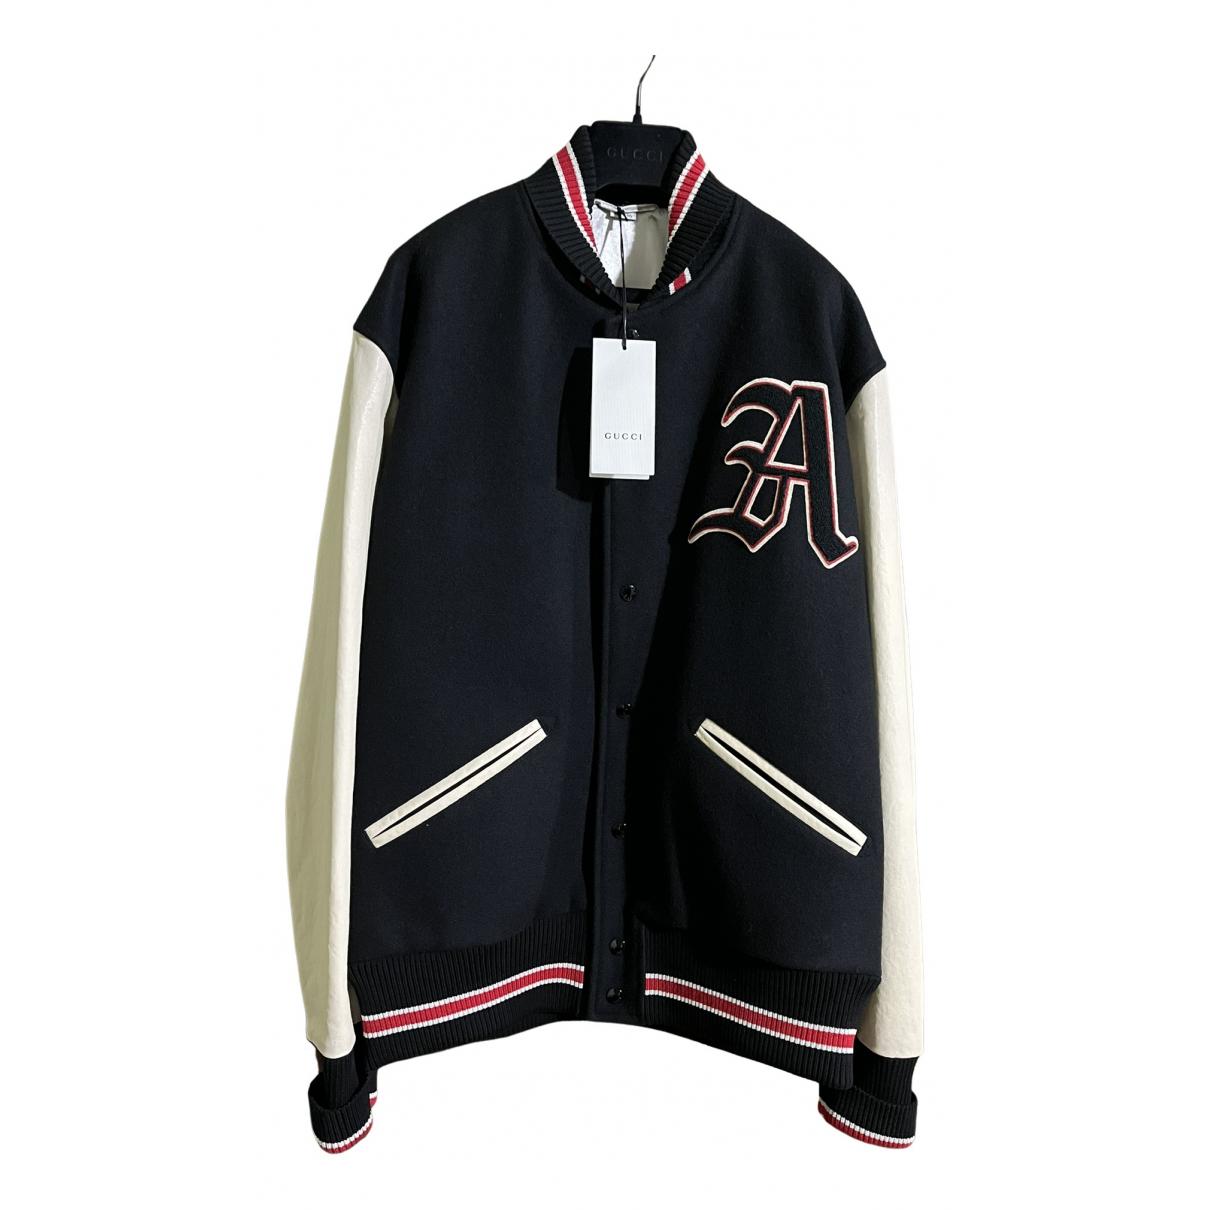 Gucci Men's Authenticated Wool Jacket